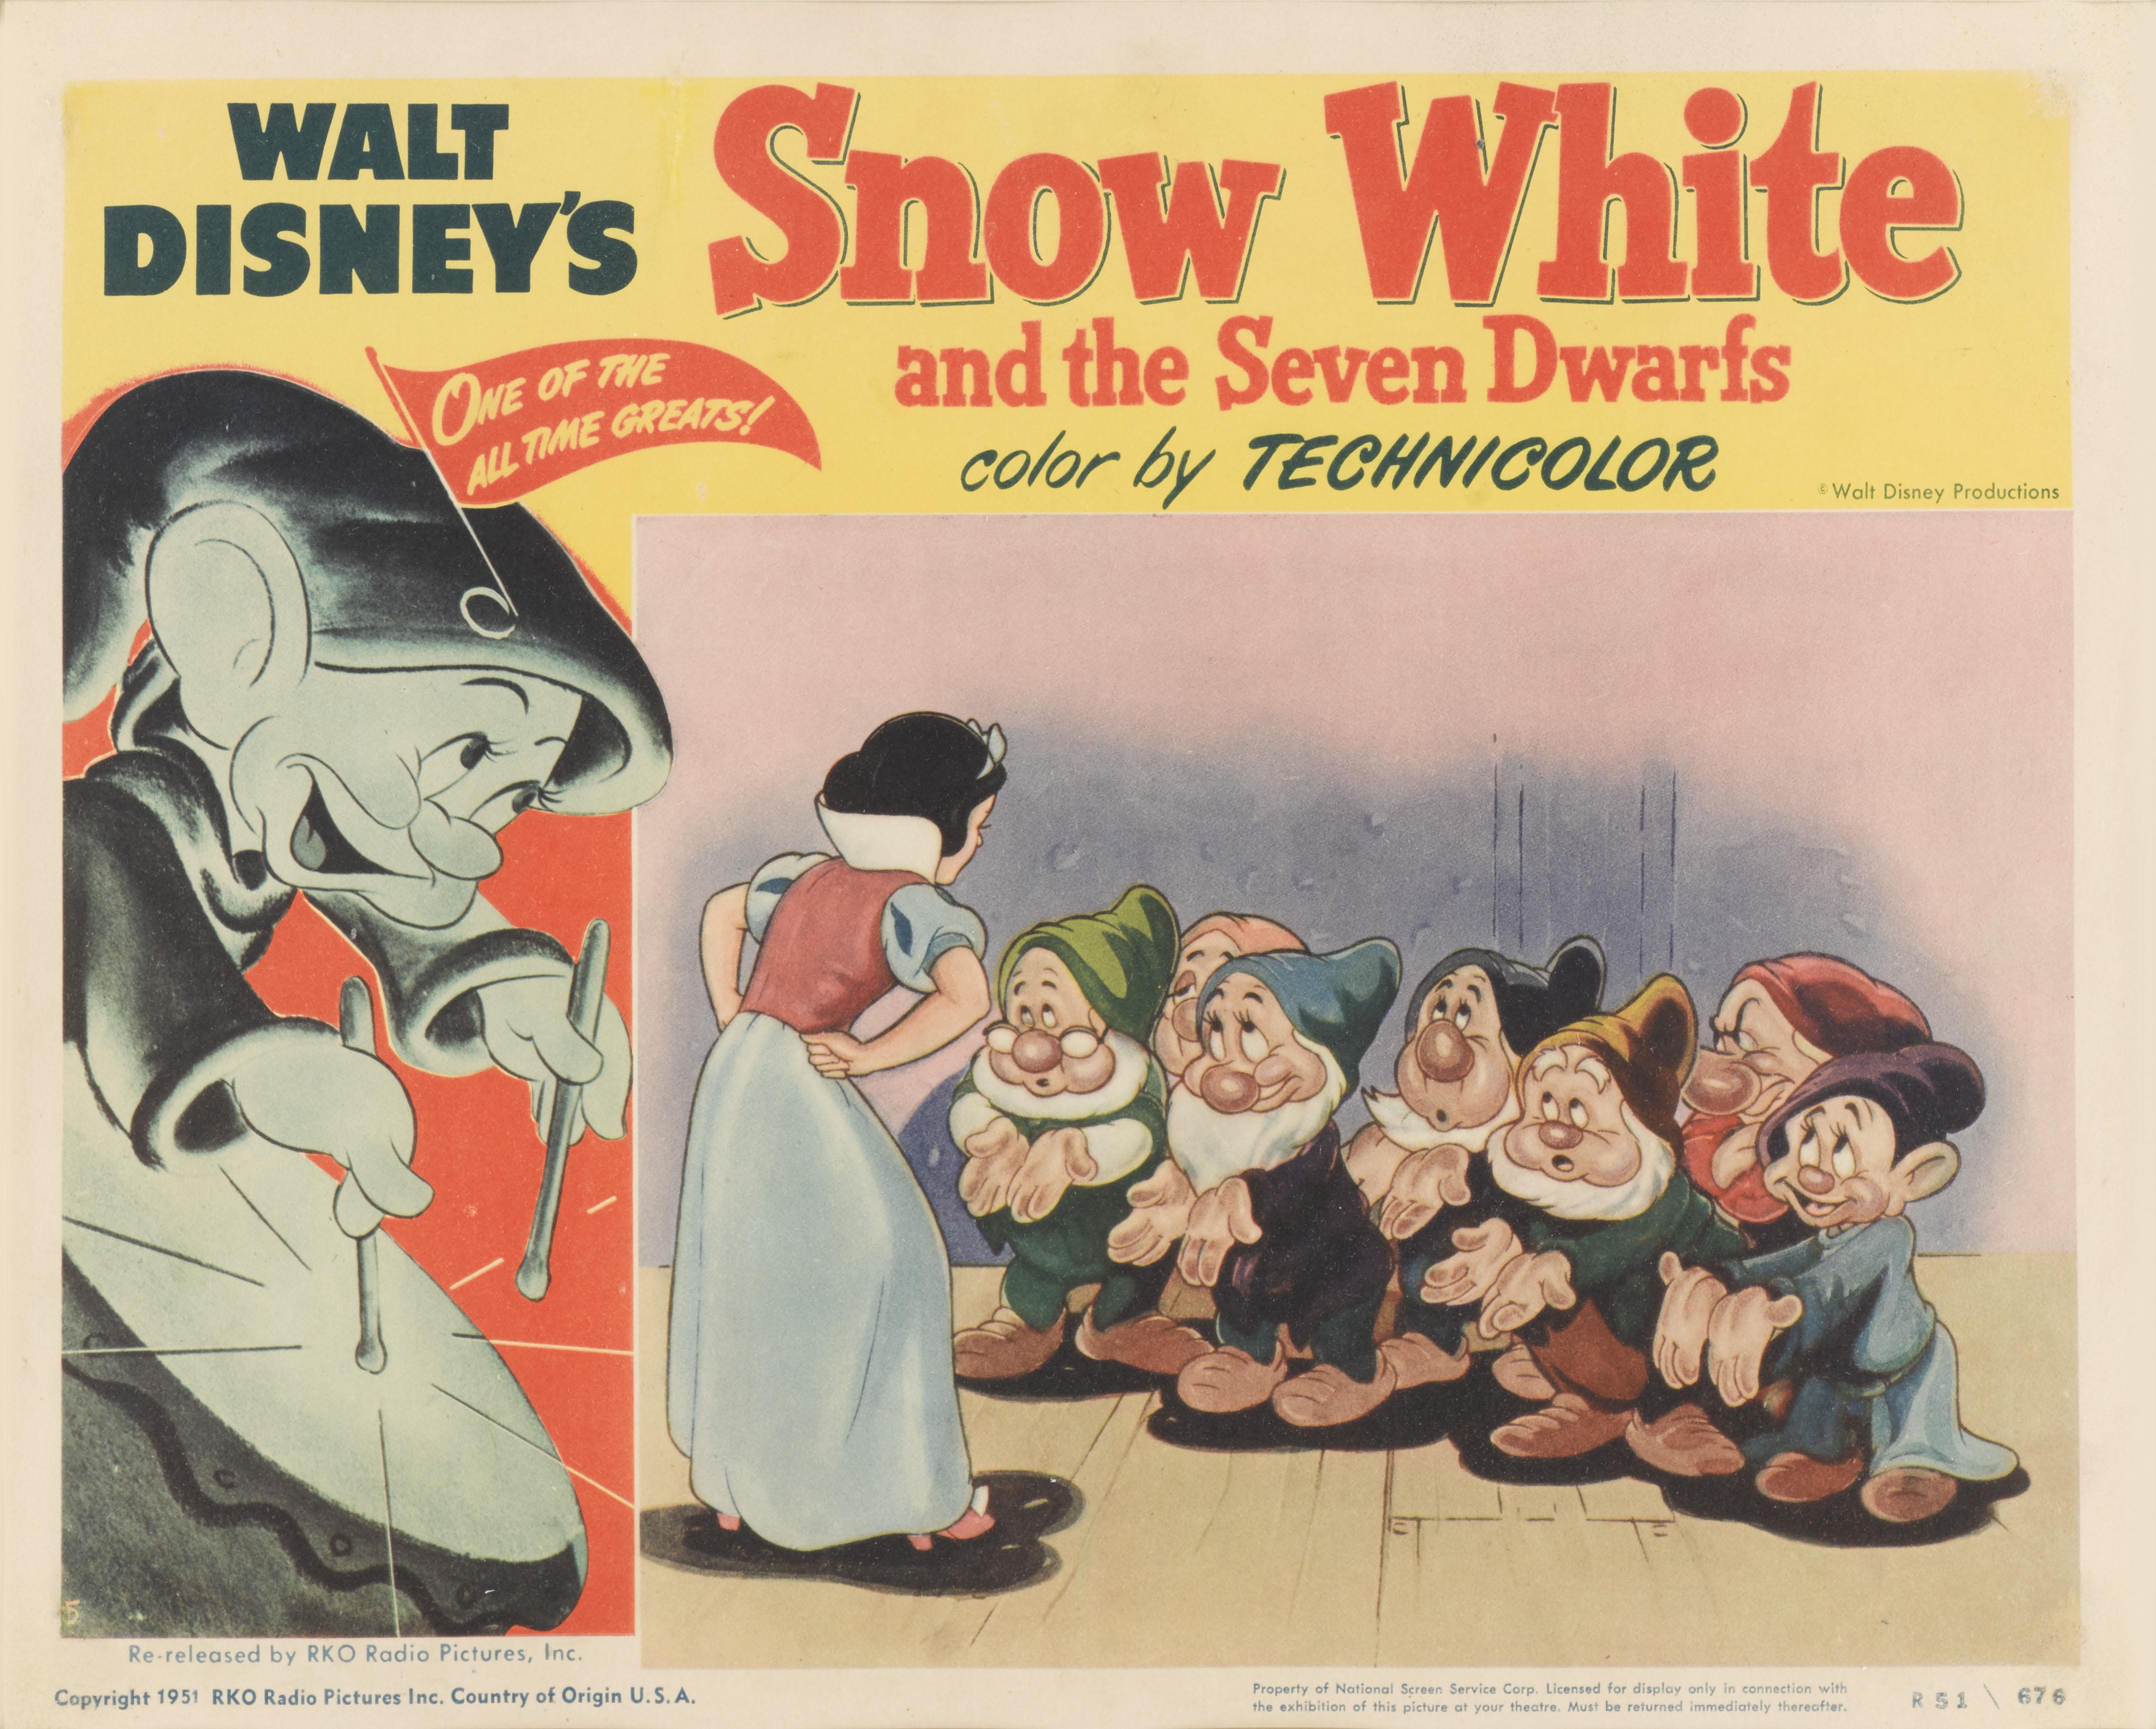 Original US lobby card for Snow White and the Seven Dwarfs 1937.
This piece would have been used to advertise the film inside the cinema foyer. This lobby card was created for as small re-release of the film in 1951
This was Walt Disney's first